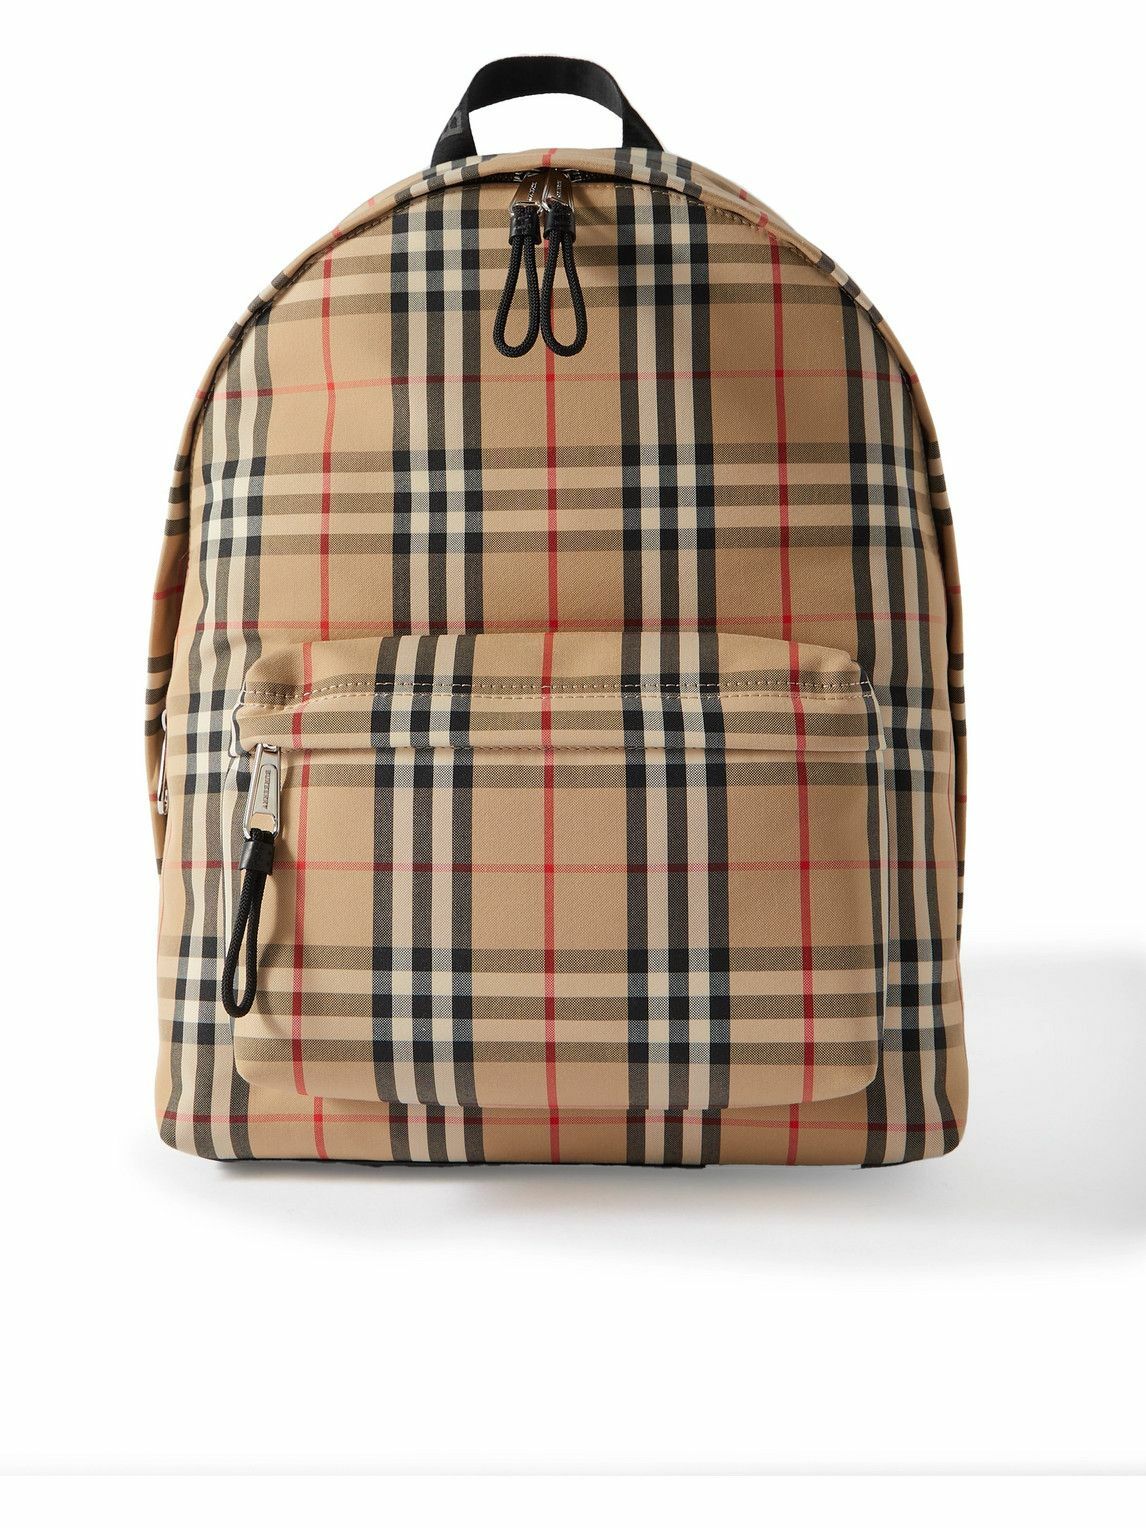 Burberry - Checked Cotton-Blend Backpack Burberry